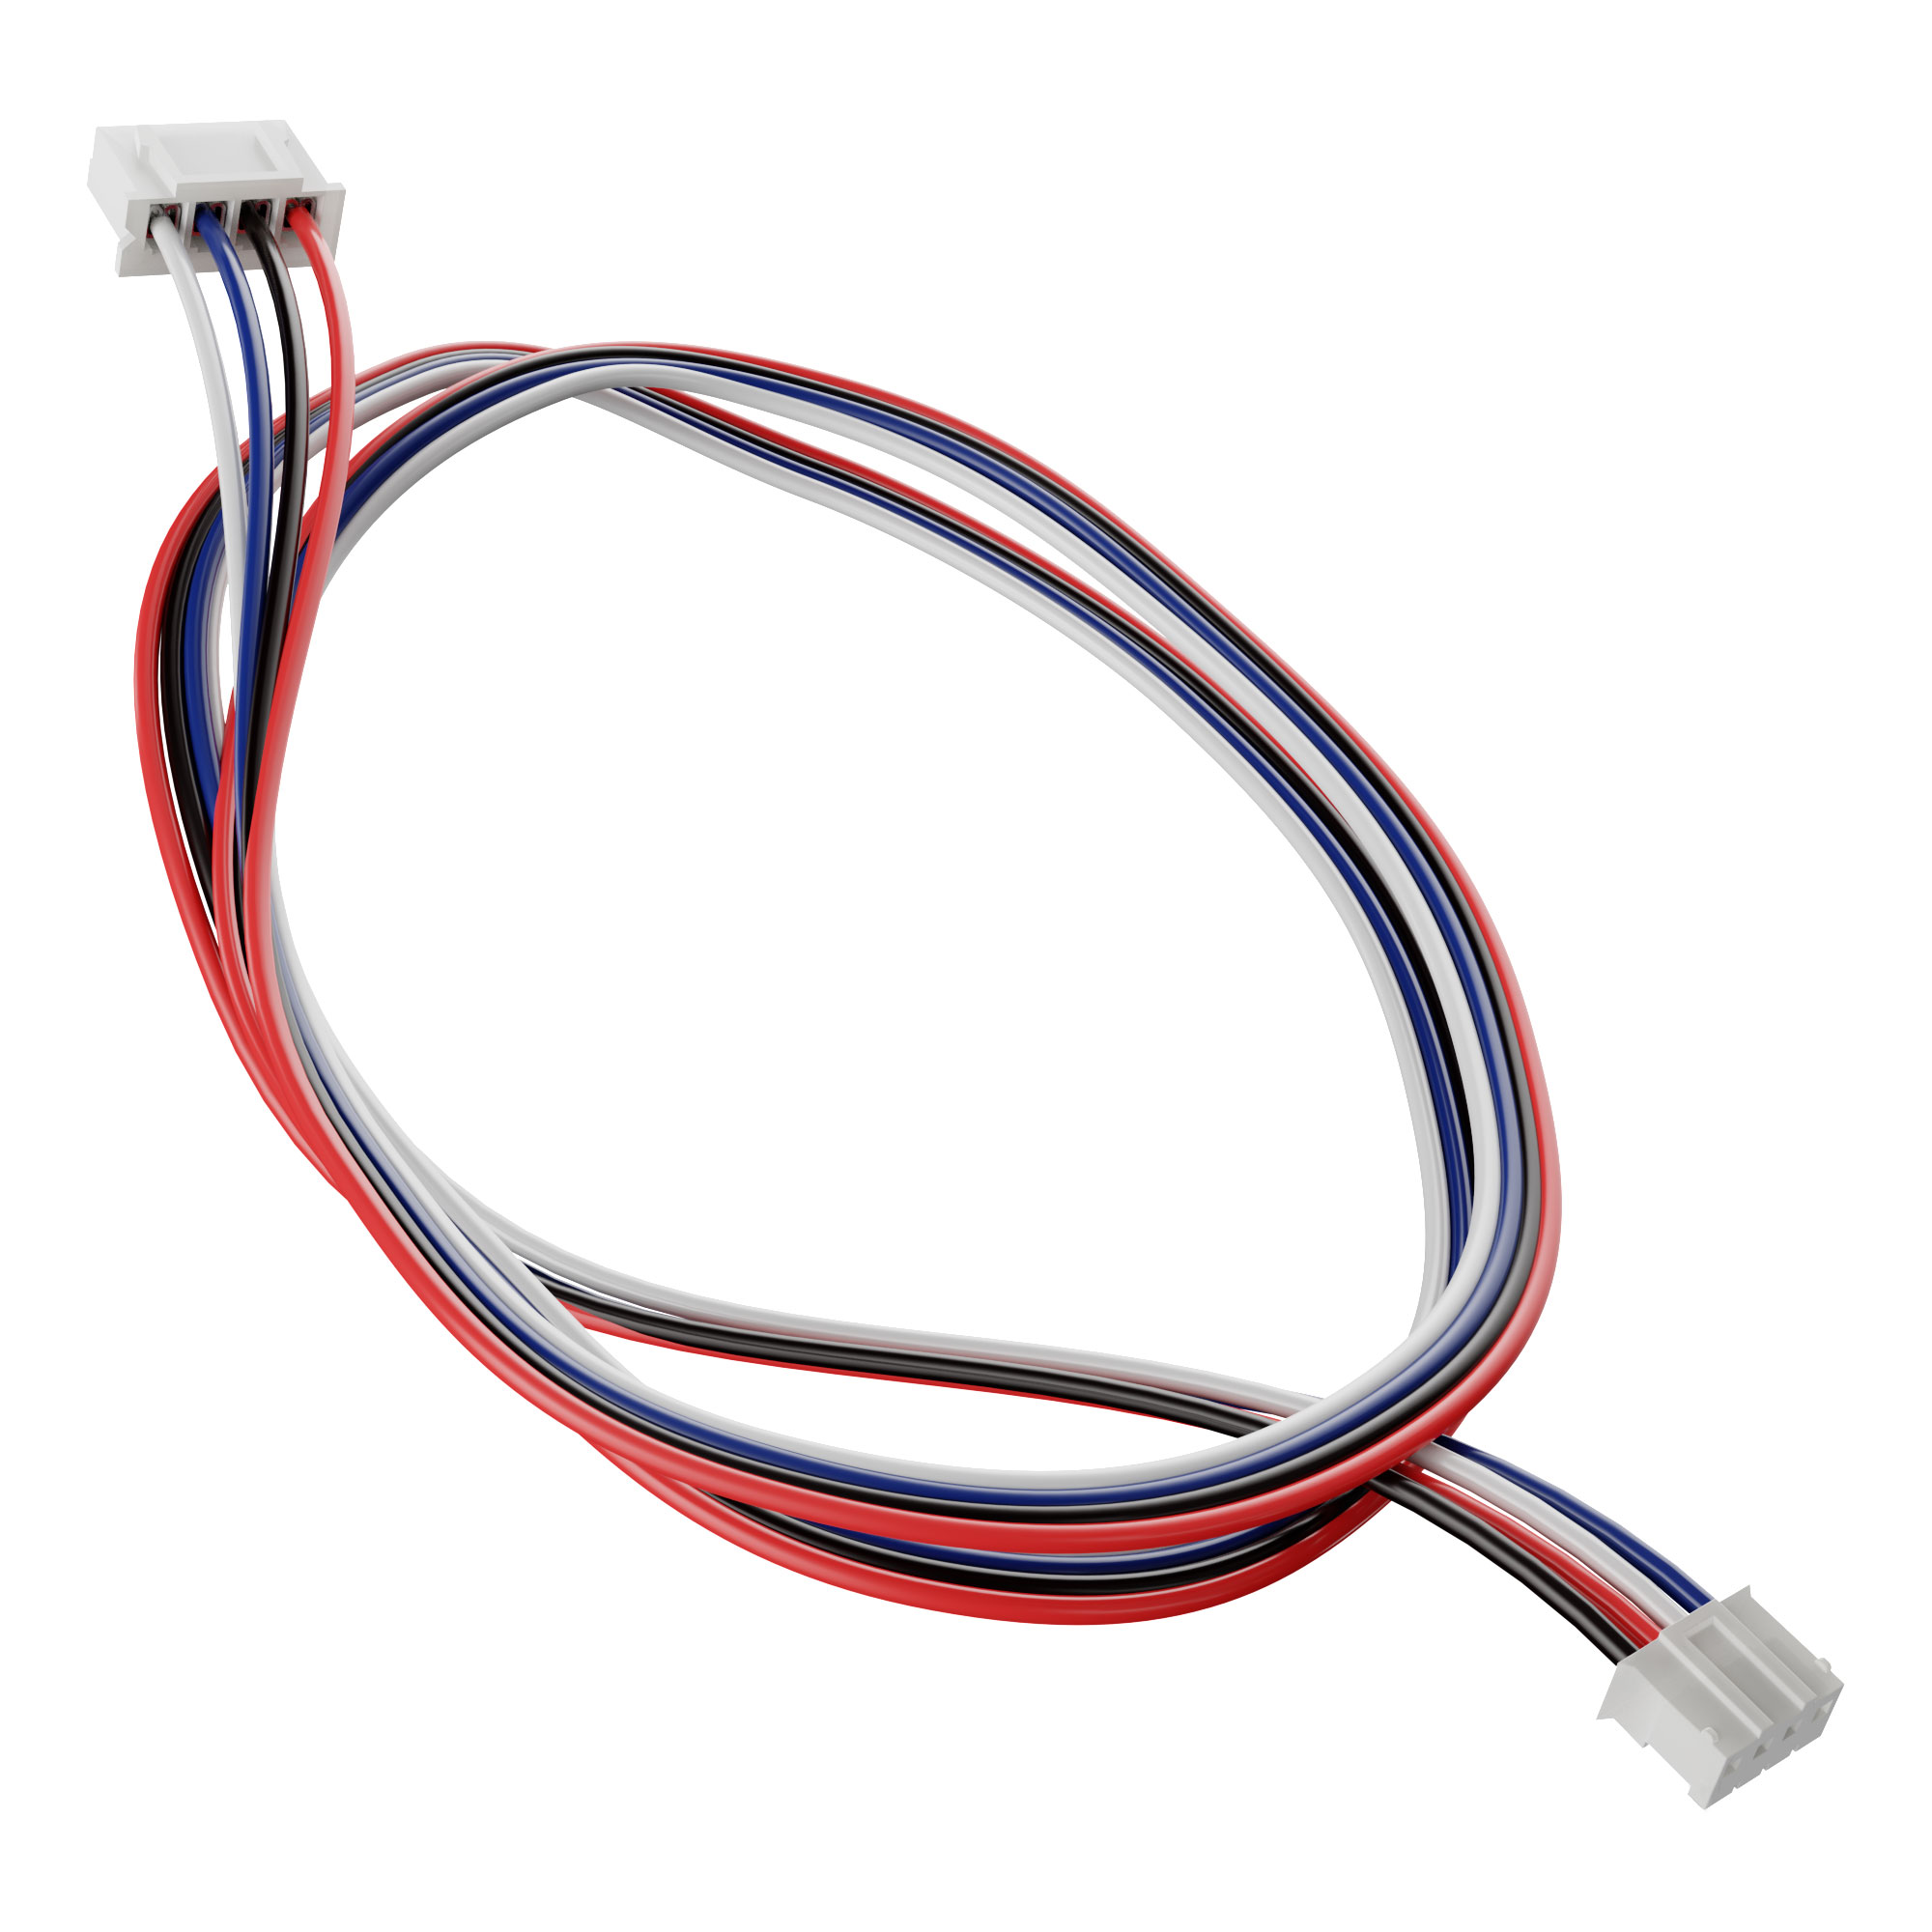 JST-PHR-4 to 4-Pin 0.1 in. Female Adapter Cable